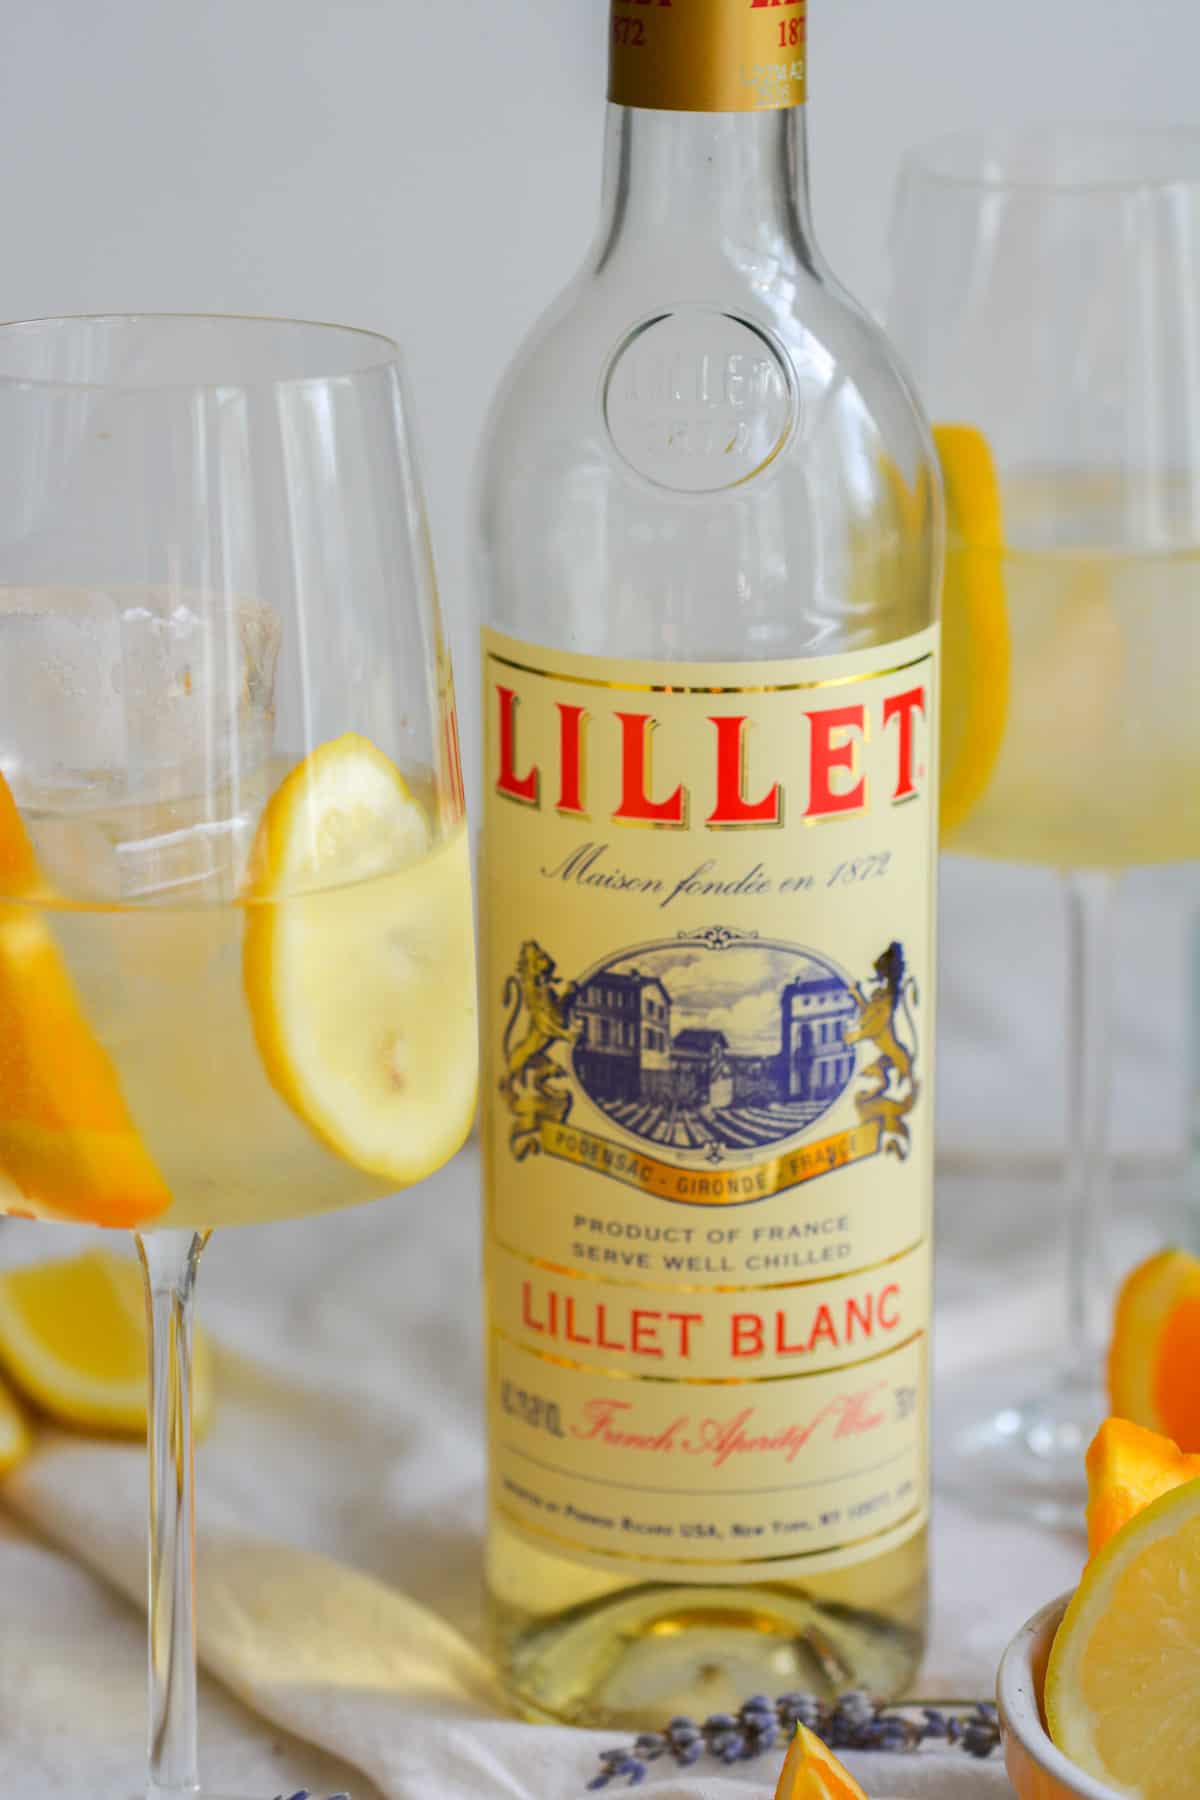 A bottle of Lillet next to two wine glasses of spritz